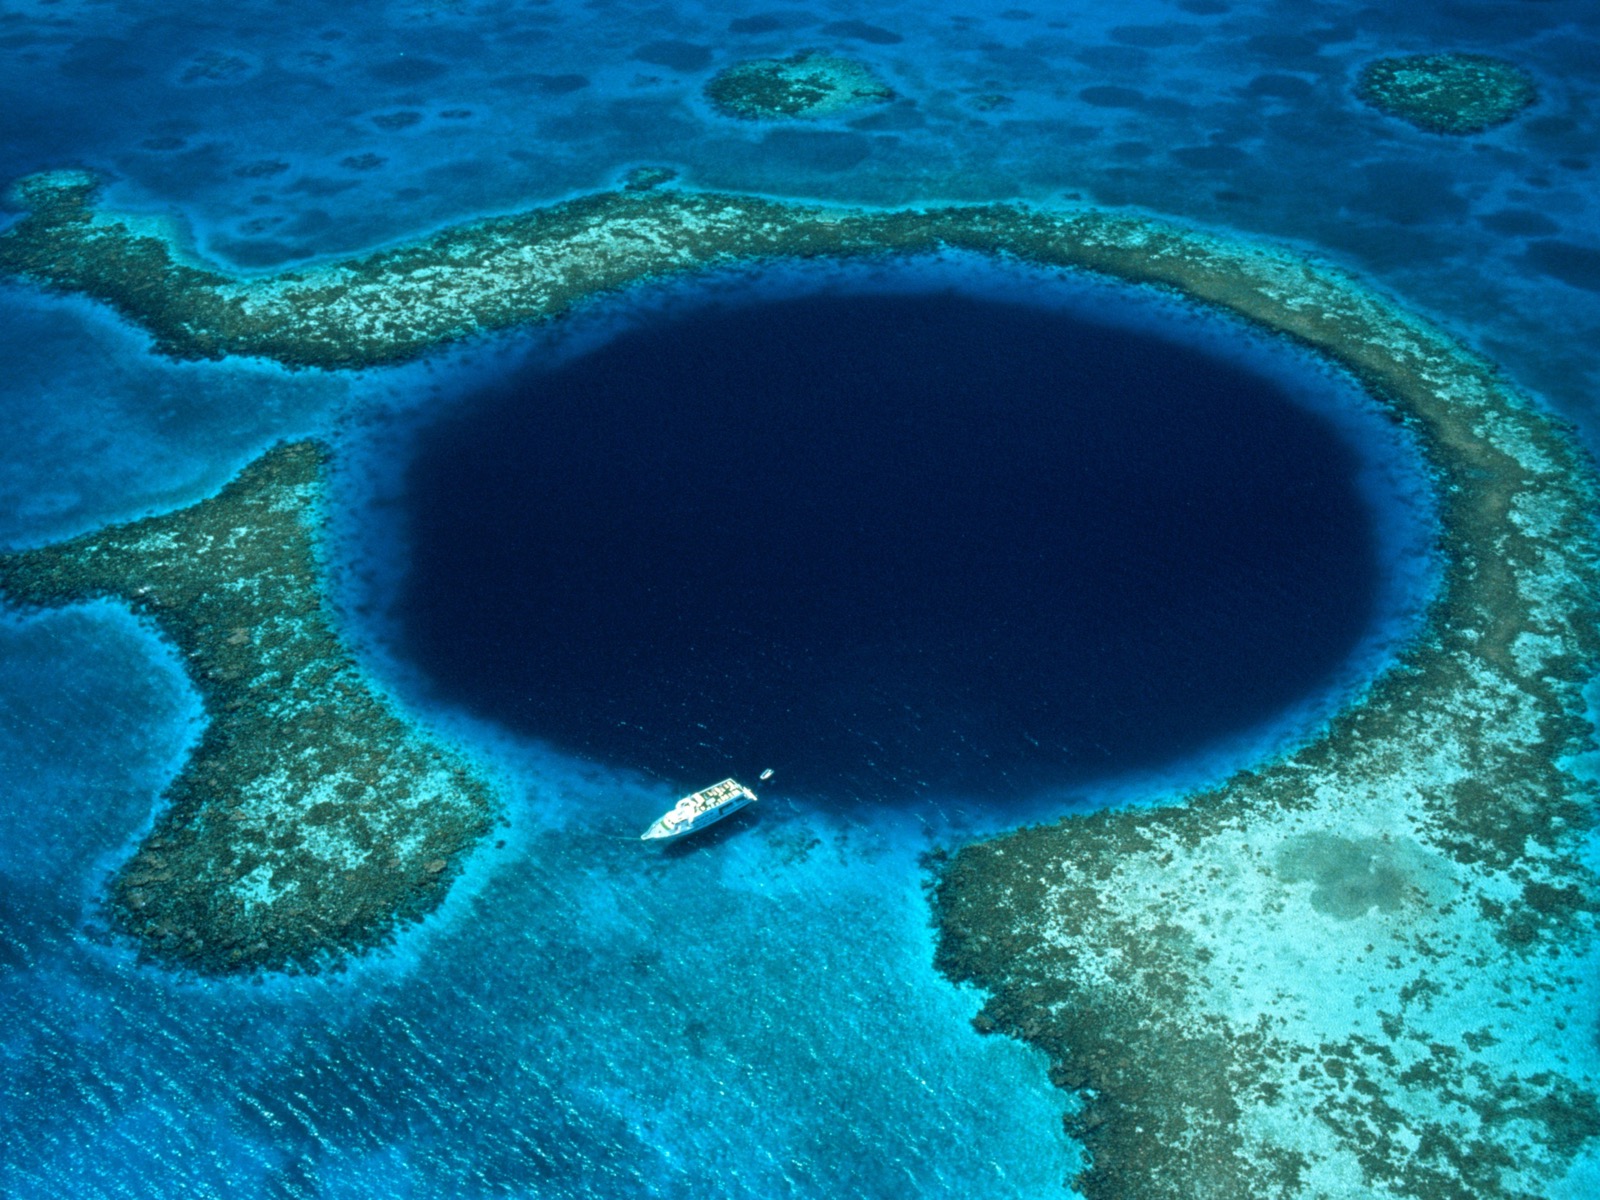 We Know How Brave You Are Based on the Adventurous Activities You Are Willing to Take Part in Dive Belize's Great Blue Hole